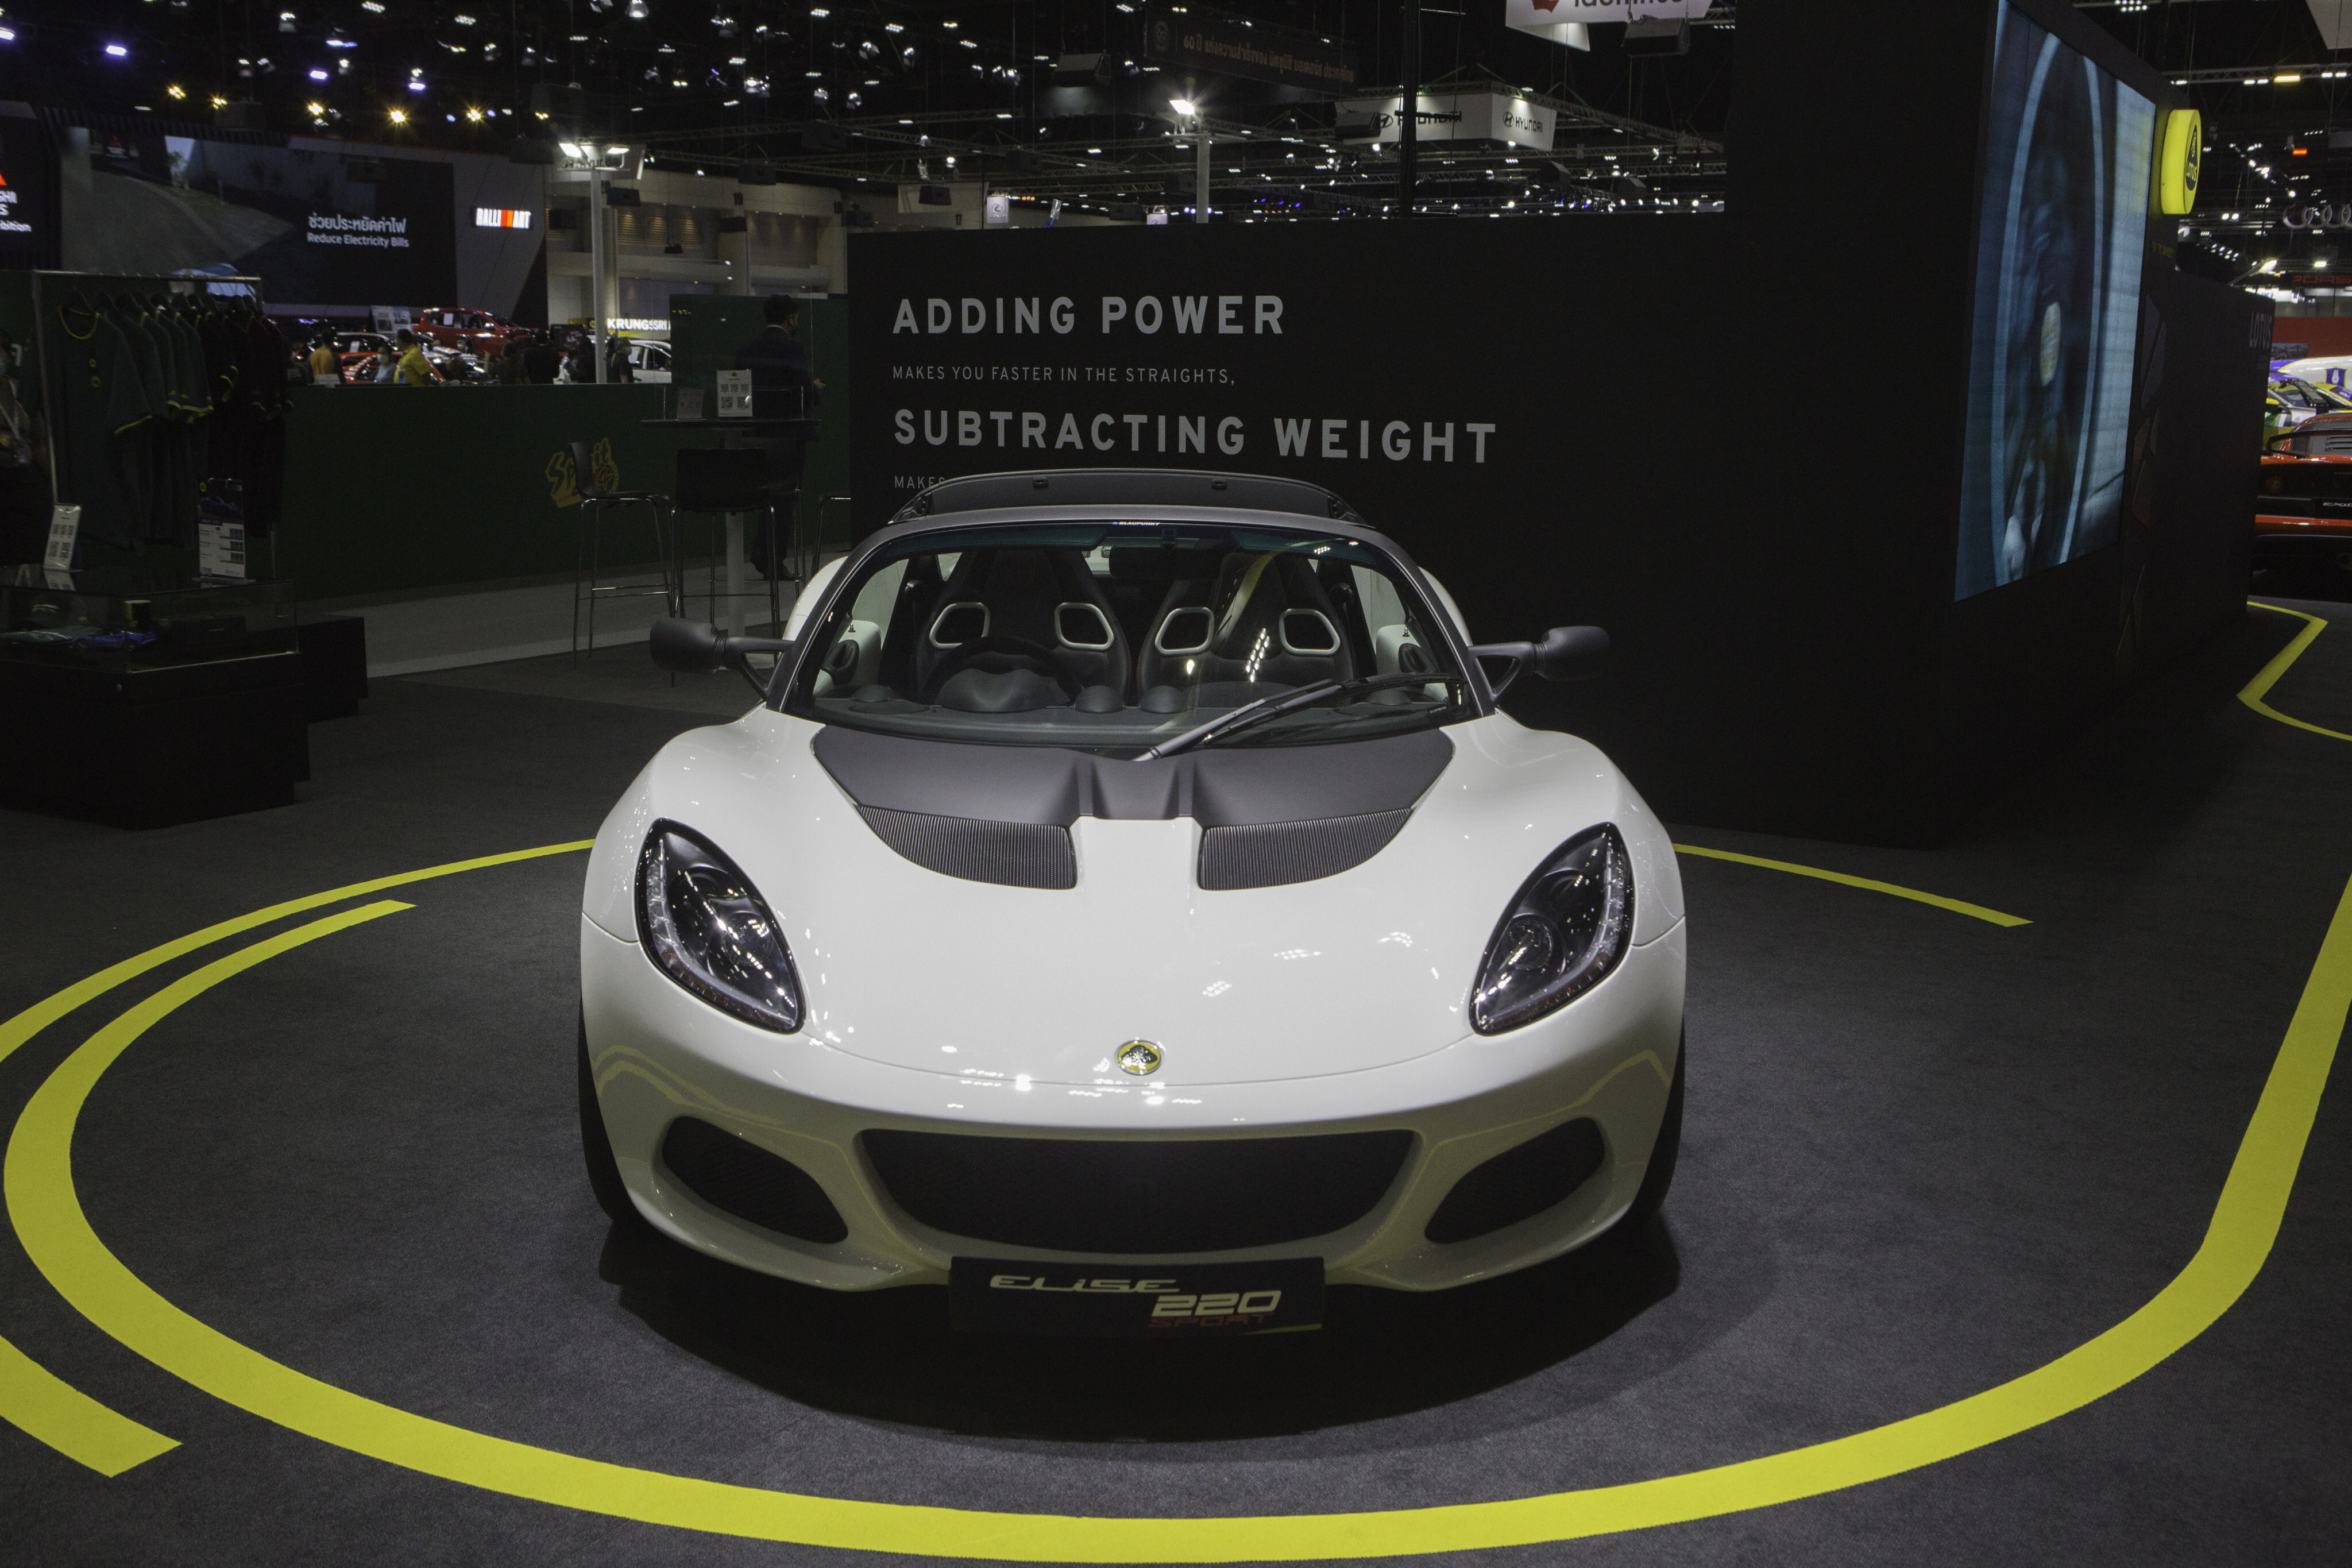 Geely gained control over Lotus in 2017, when it agreed to acquire a 49.9 per cent stake in struggling Malaysian carmaker Proton. Photo: Getty Images